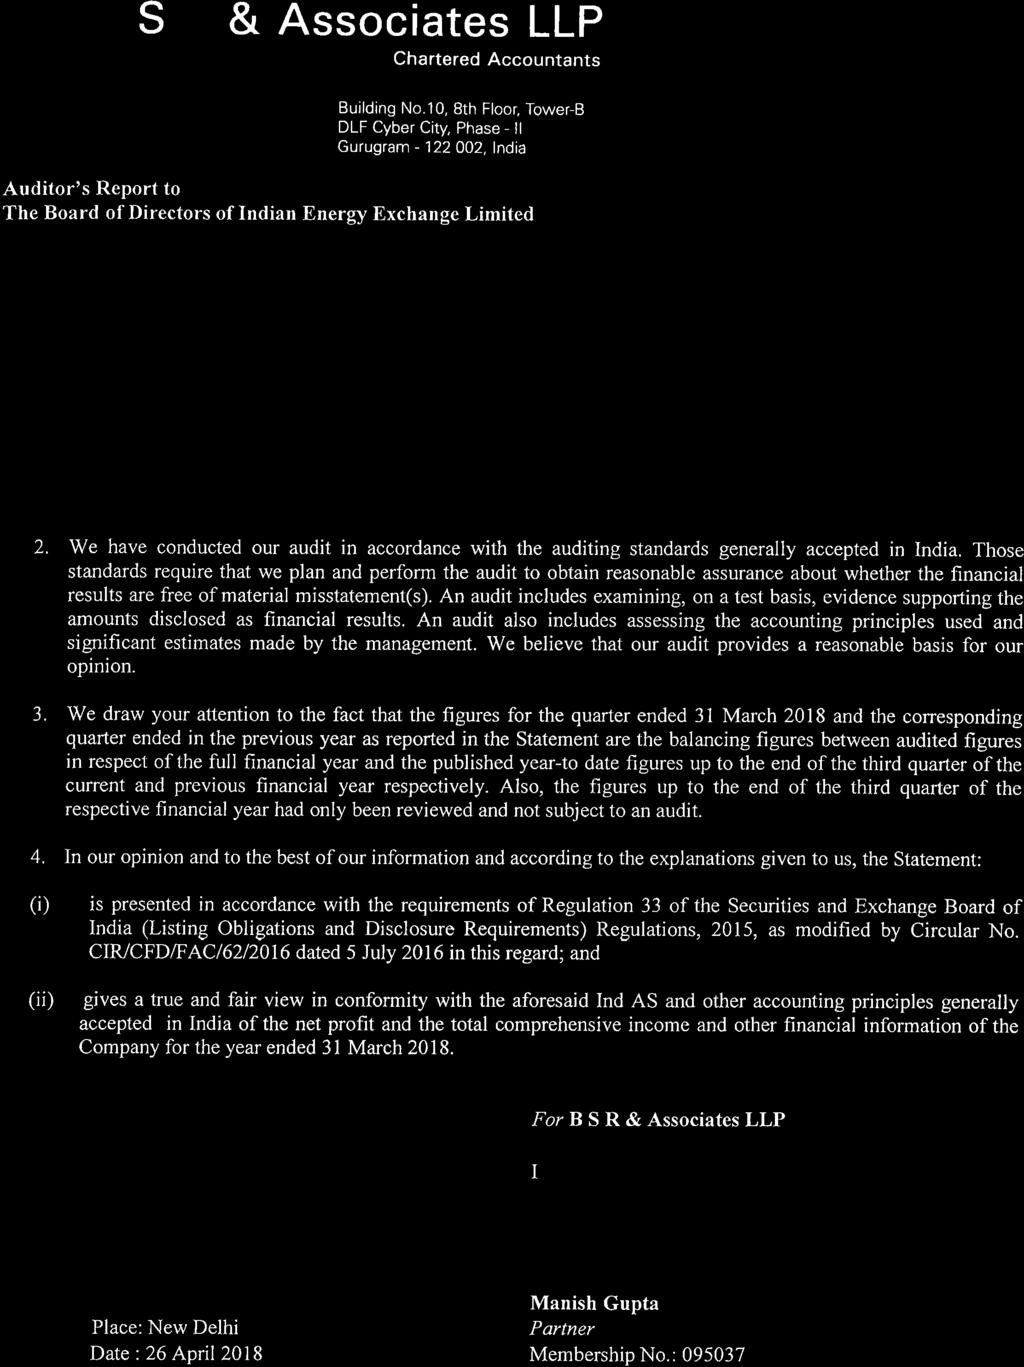 B S R & Associates LLP Chartered Accountants Auditor's Report to The Board of Directors of Indian Energy Exchange Limited Building No.